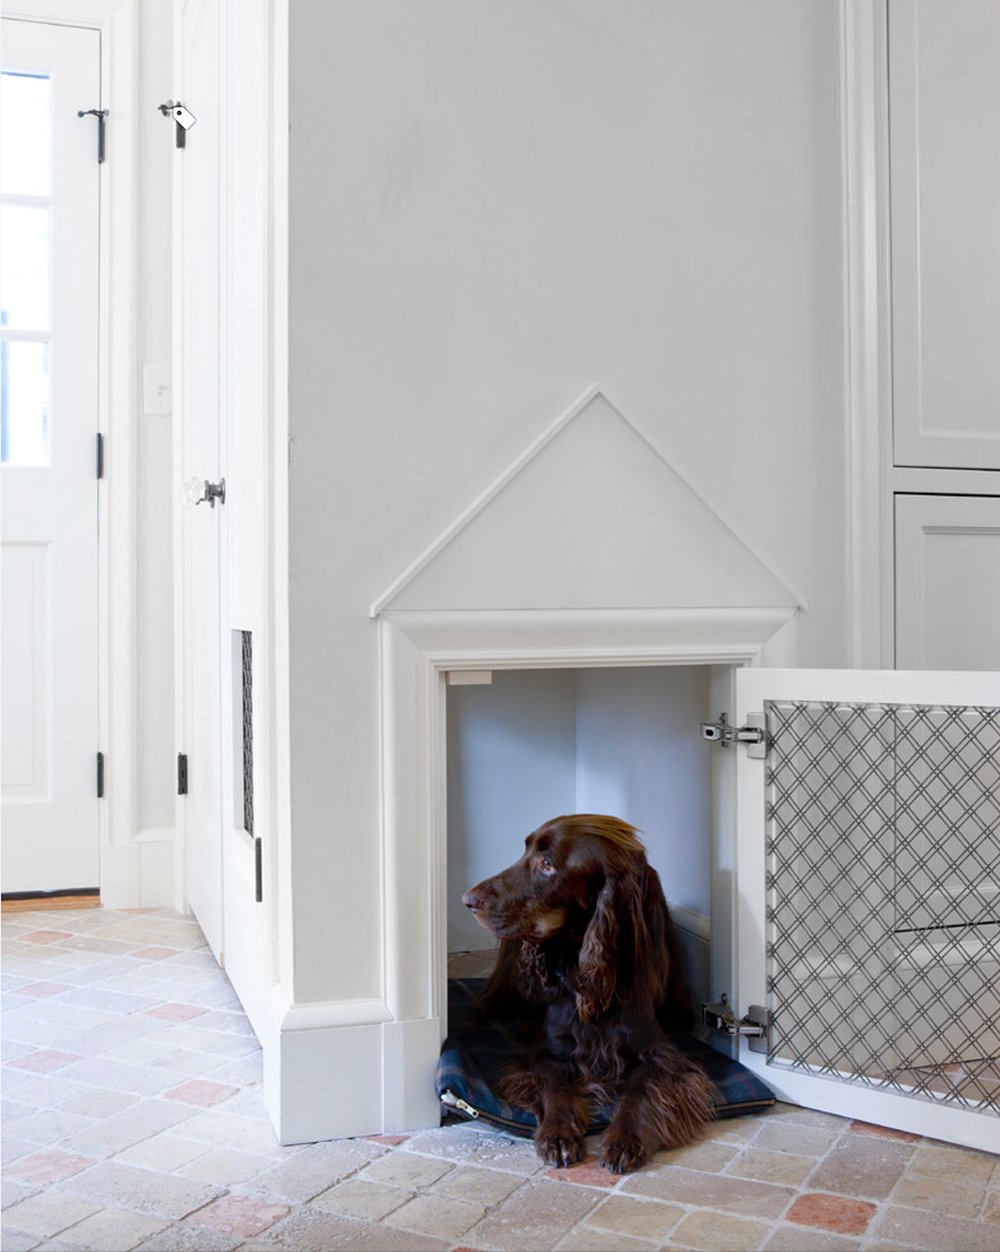 10 Smart & Creative Ideas for Homes with Dogs - roomfortuesday.com